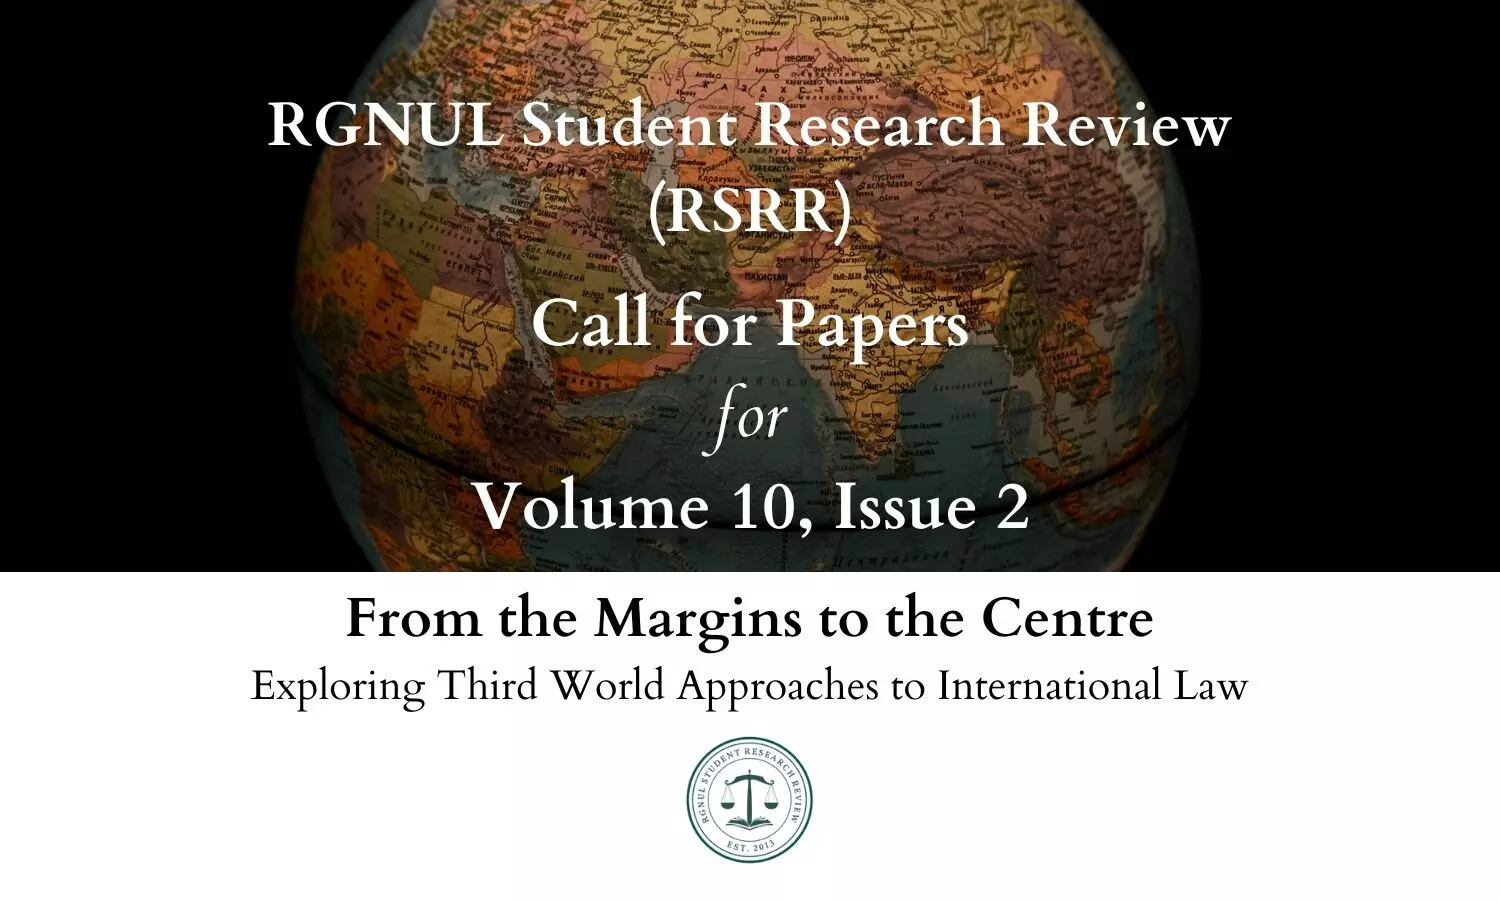 Call for Papers for Volume 10 Issue 2 | RGNUL Student Research Review